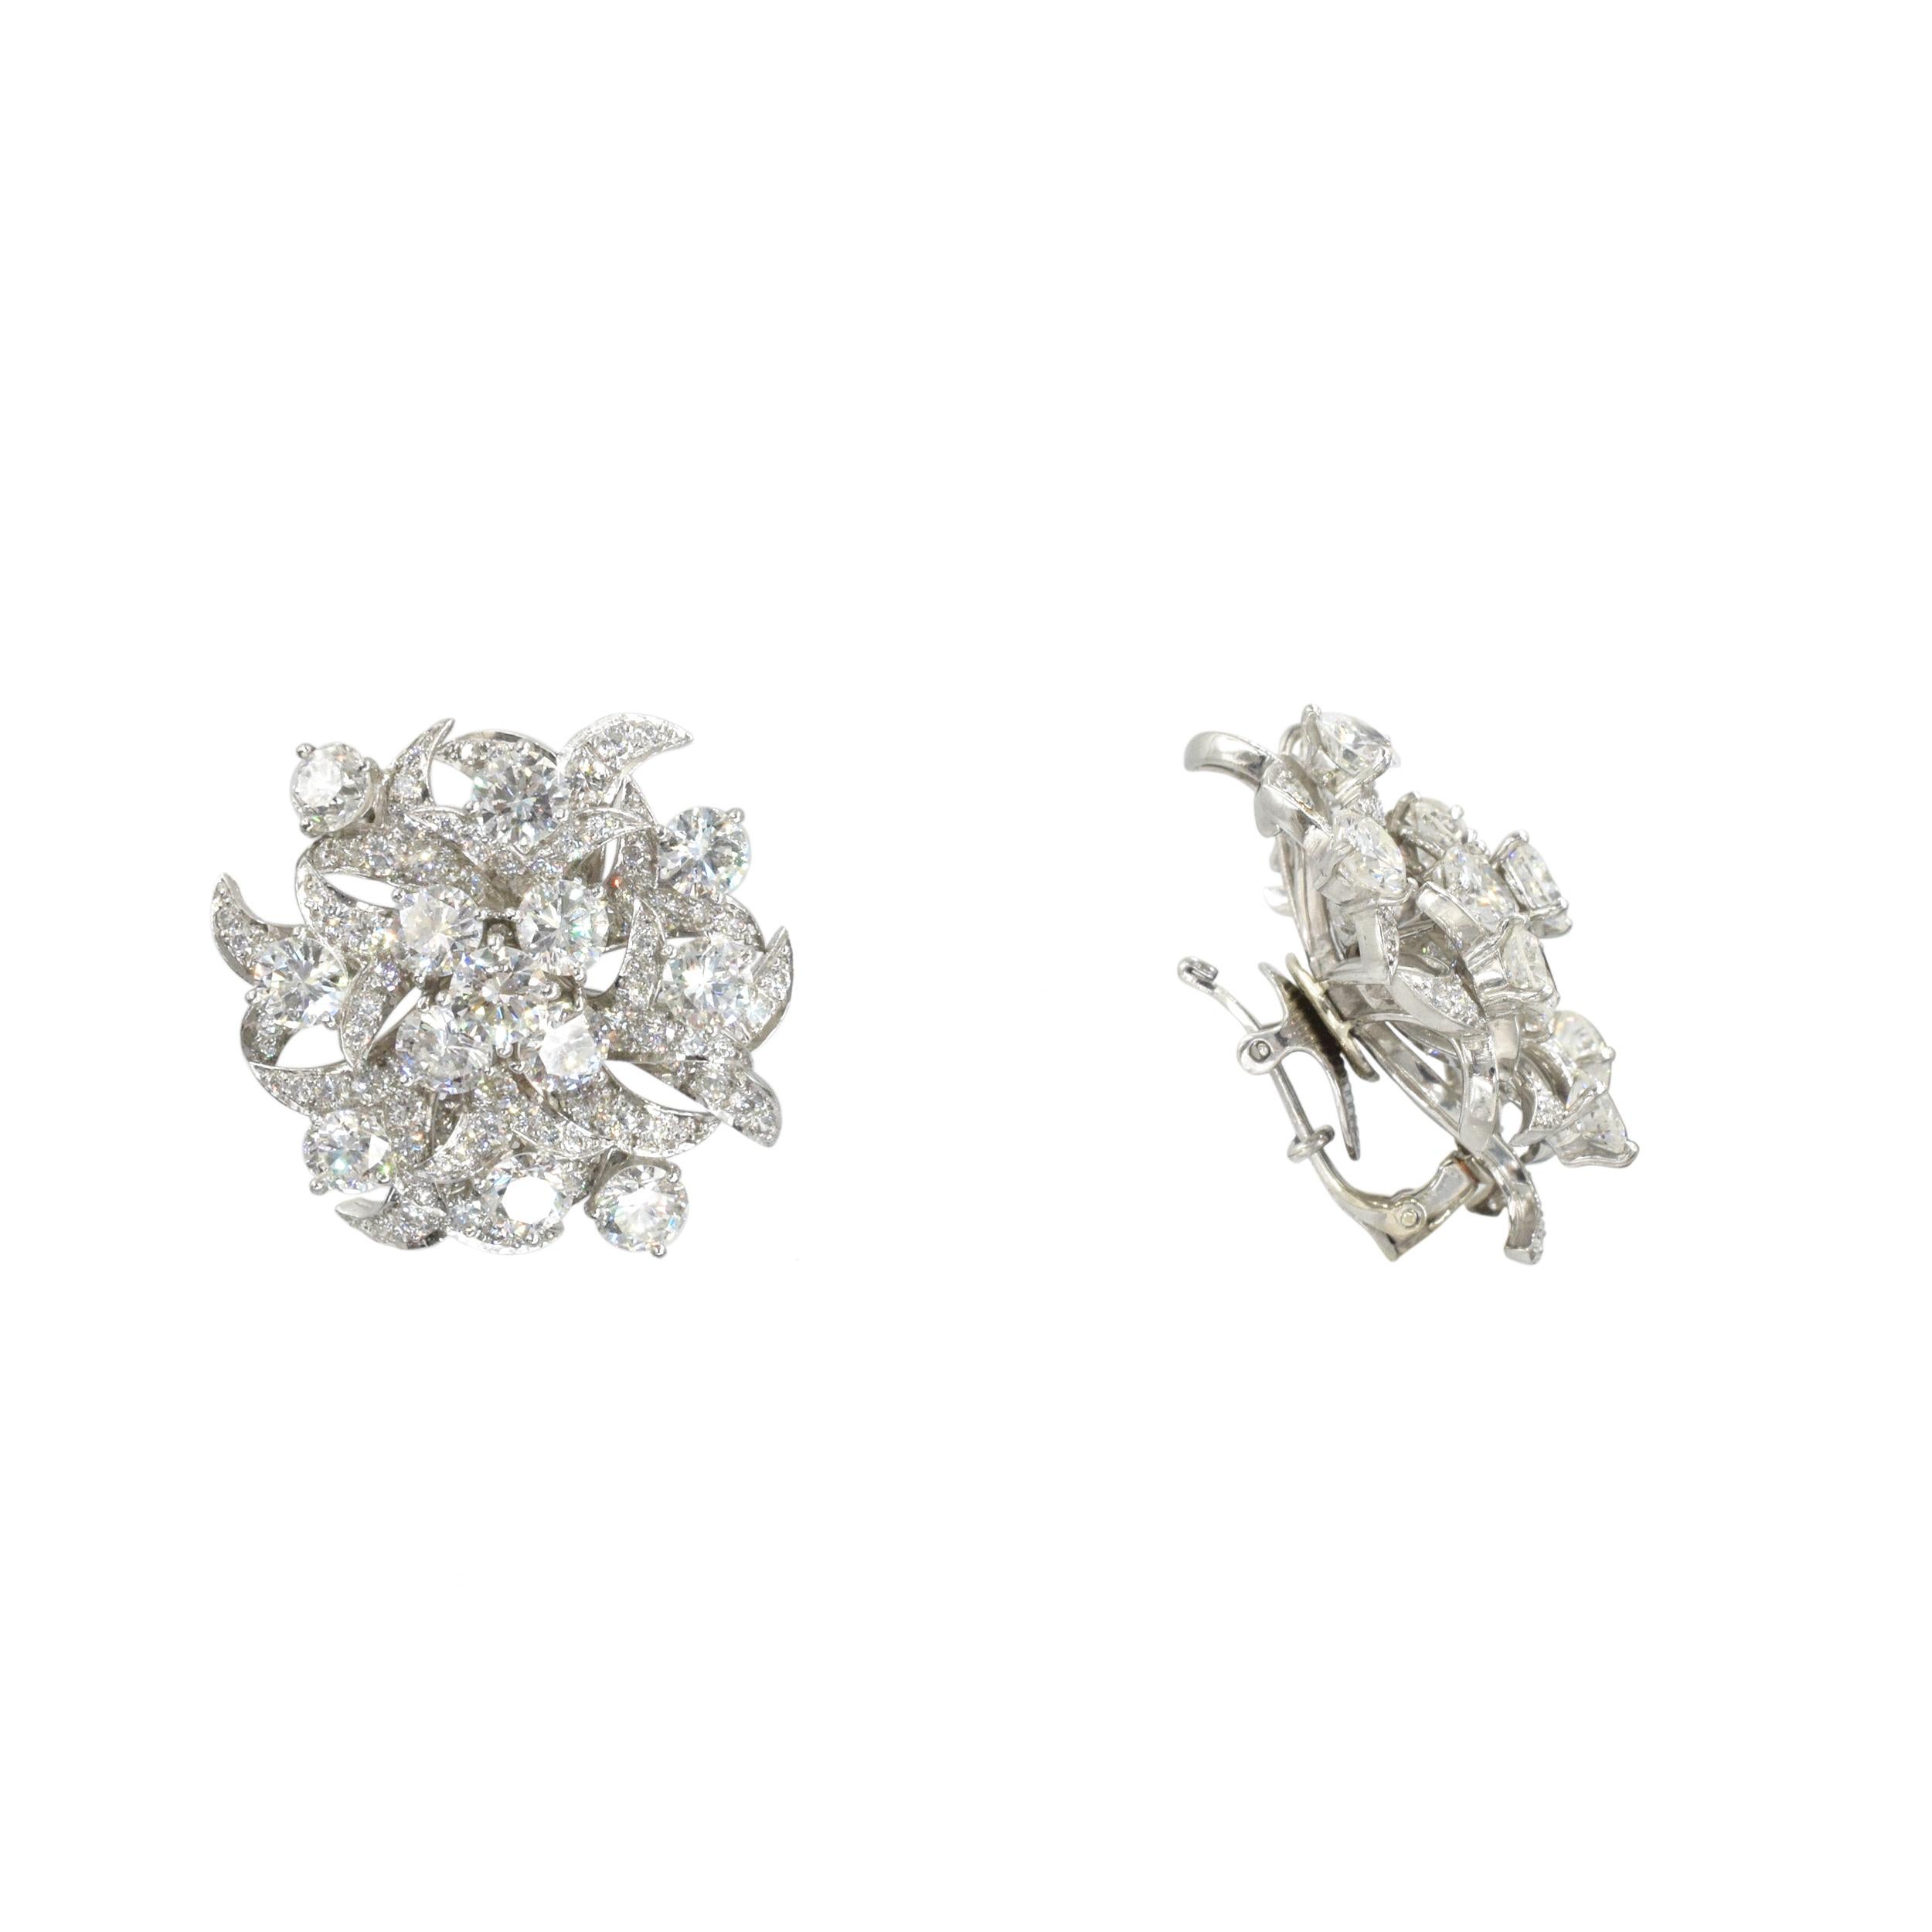 Tiffany & Co Diamond Earrings Donald Claflin In Excellent Condition For Sale In New York, NY